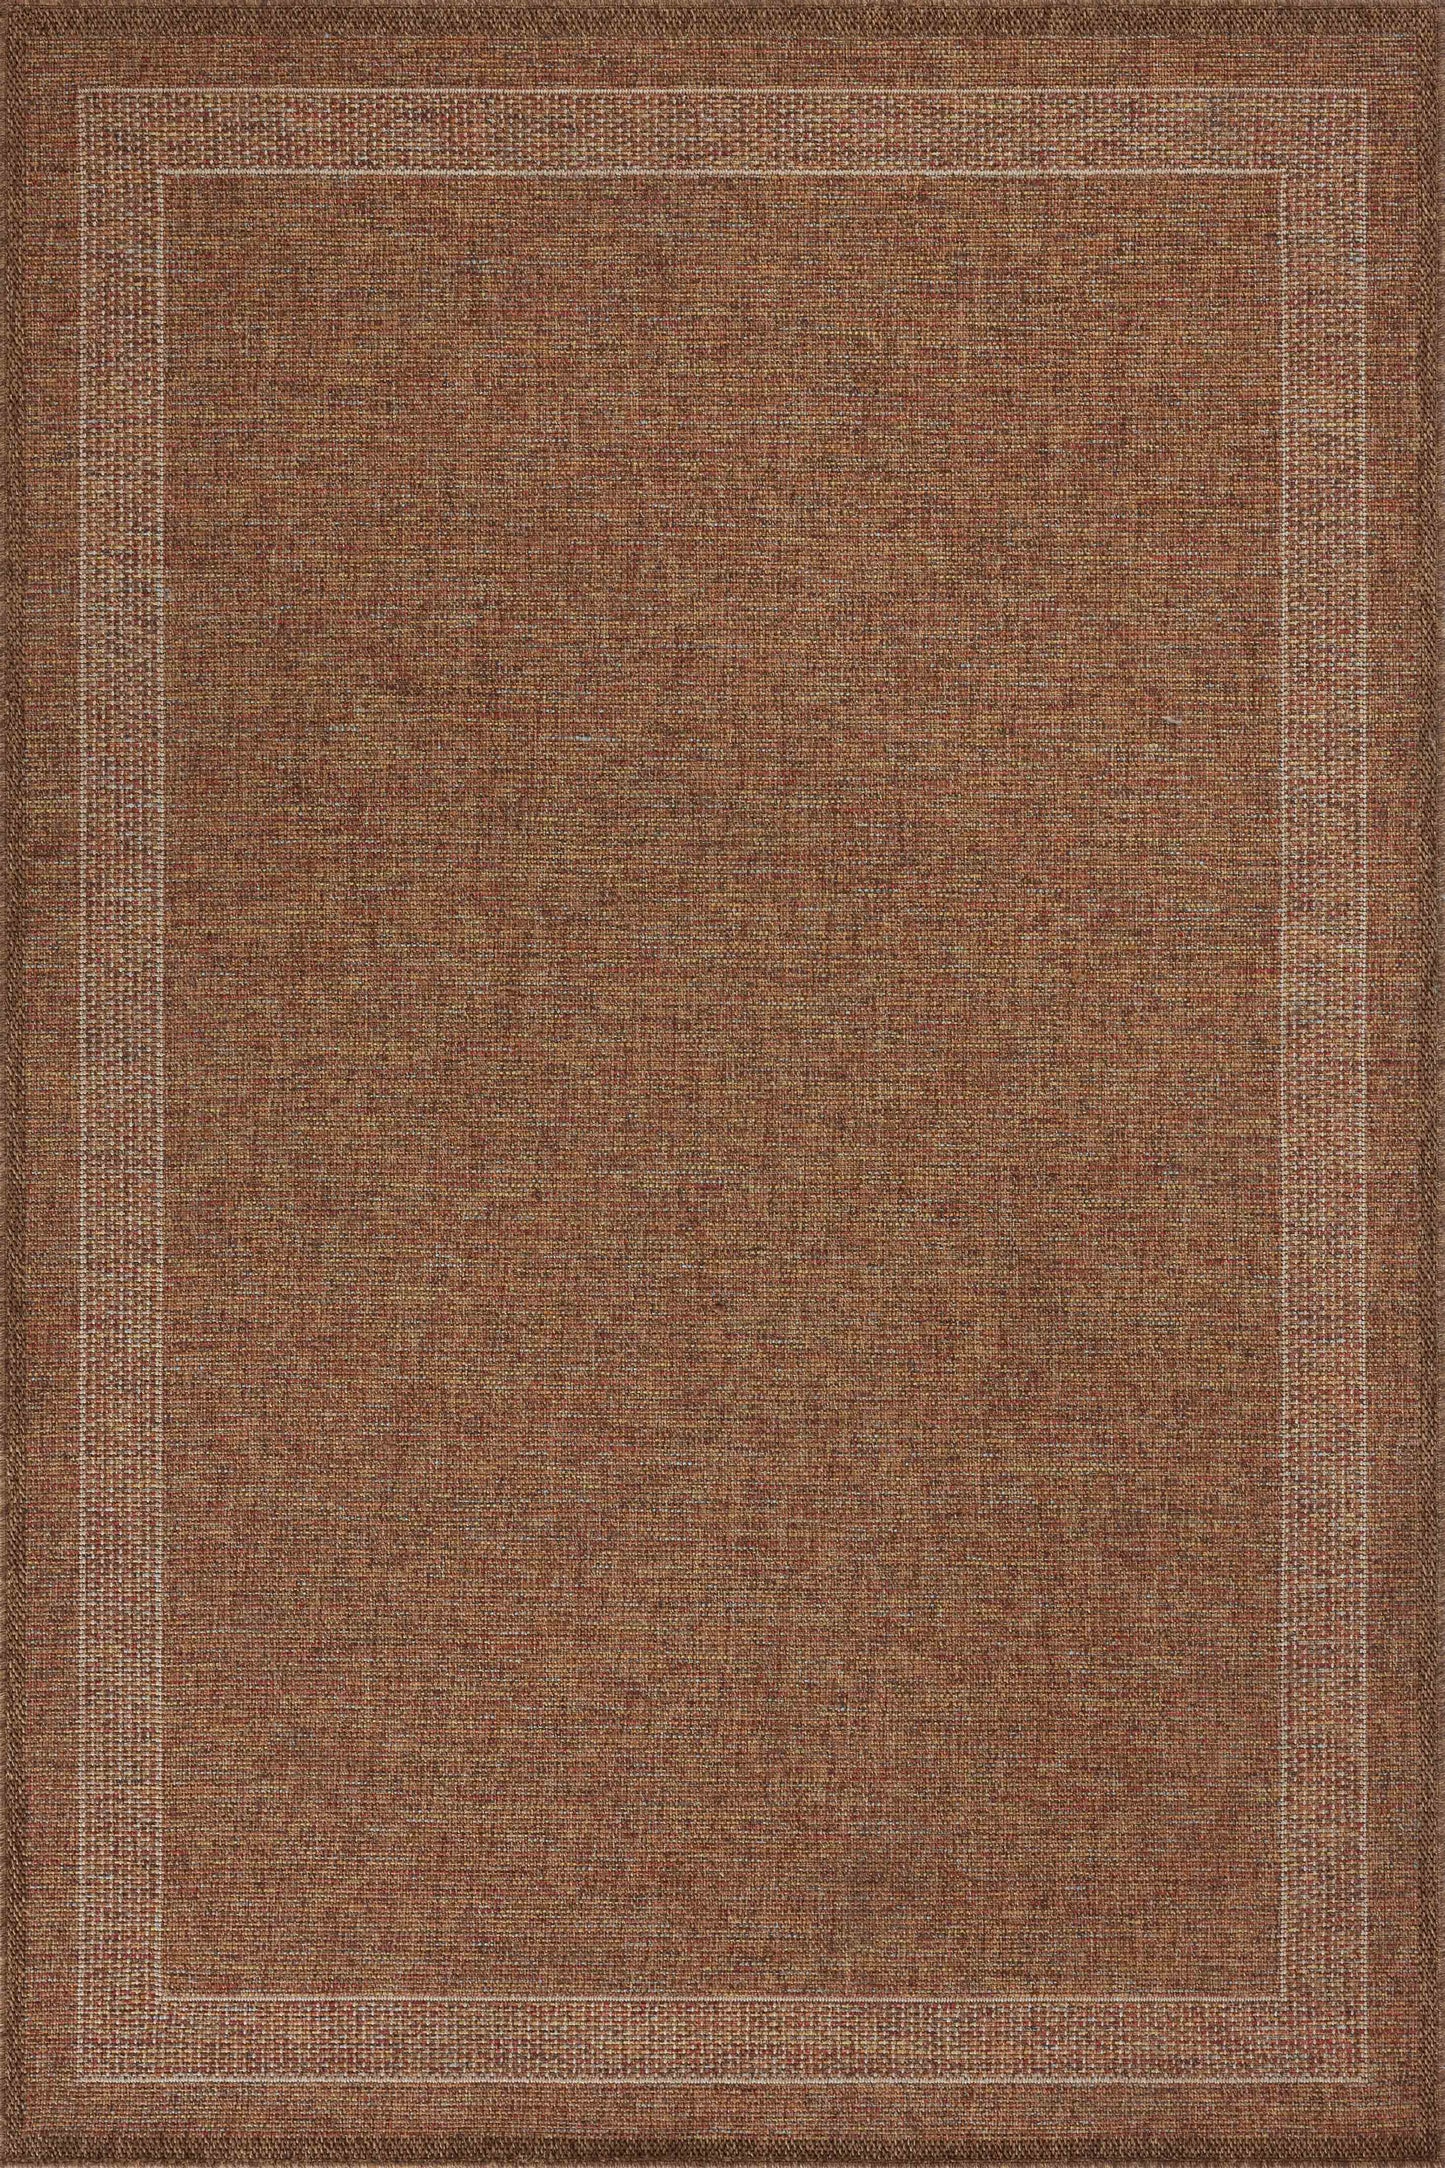 A picture of Loloi's Merrick rug, in style MER-07, color Cinnamon / Multi